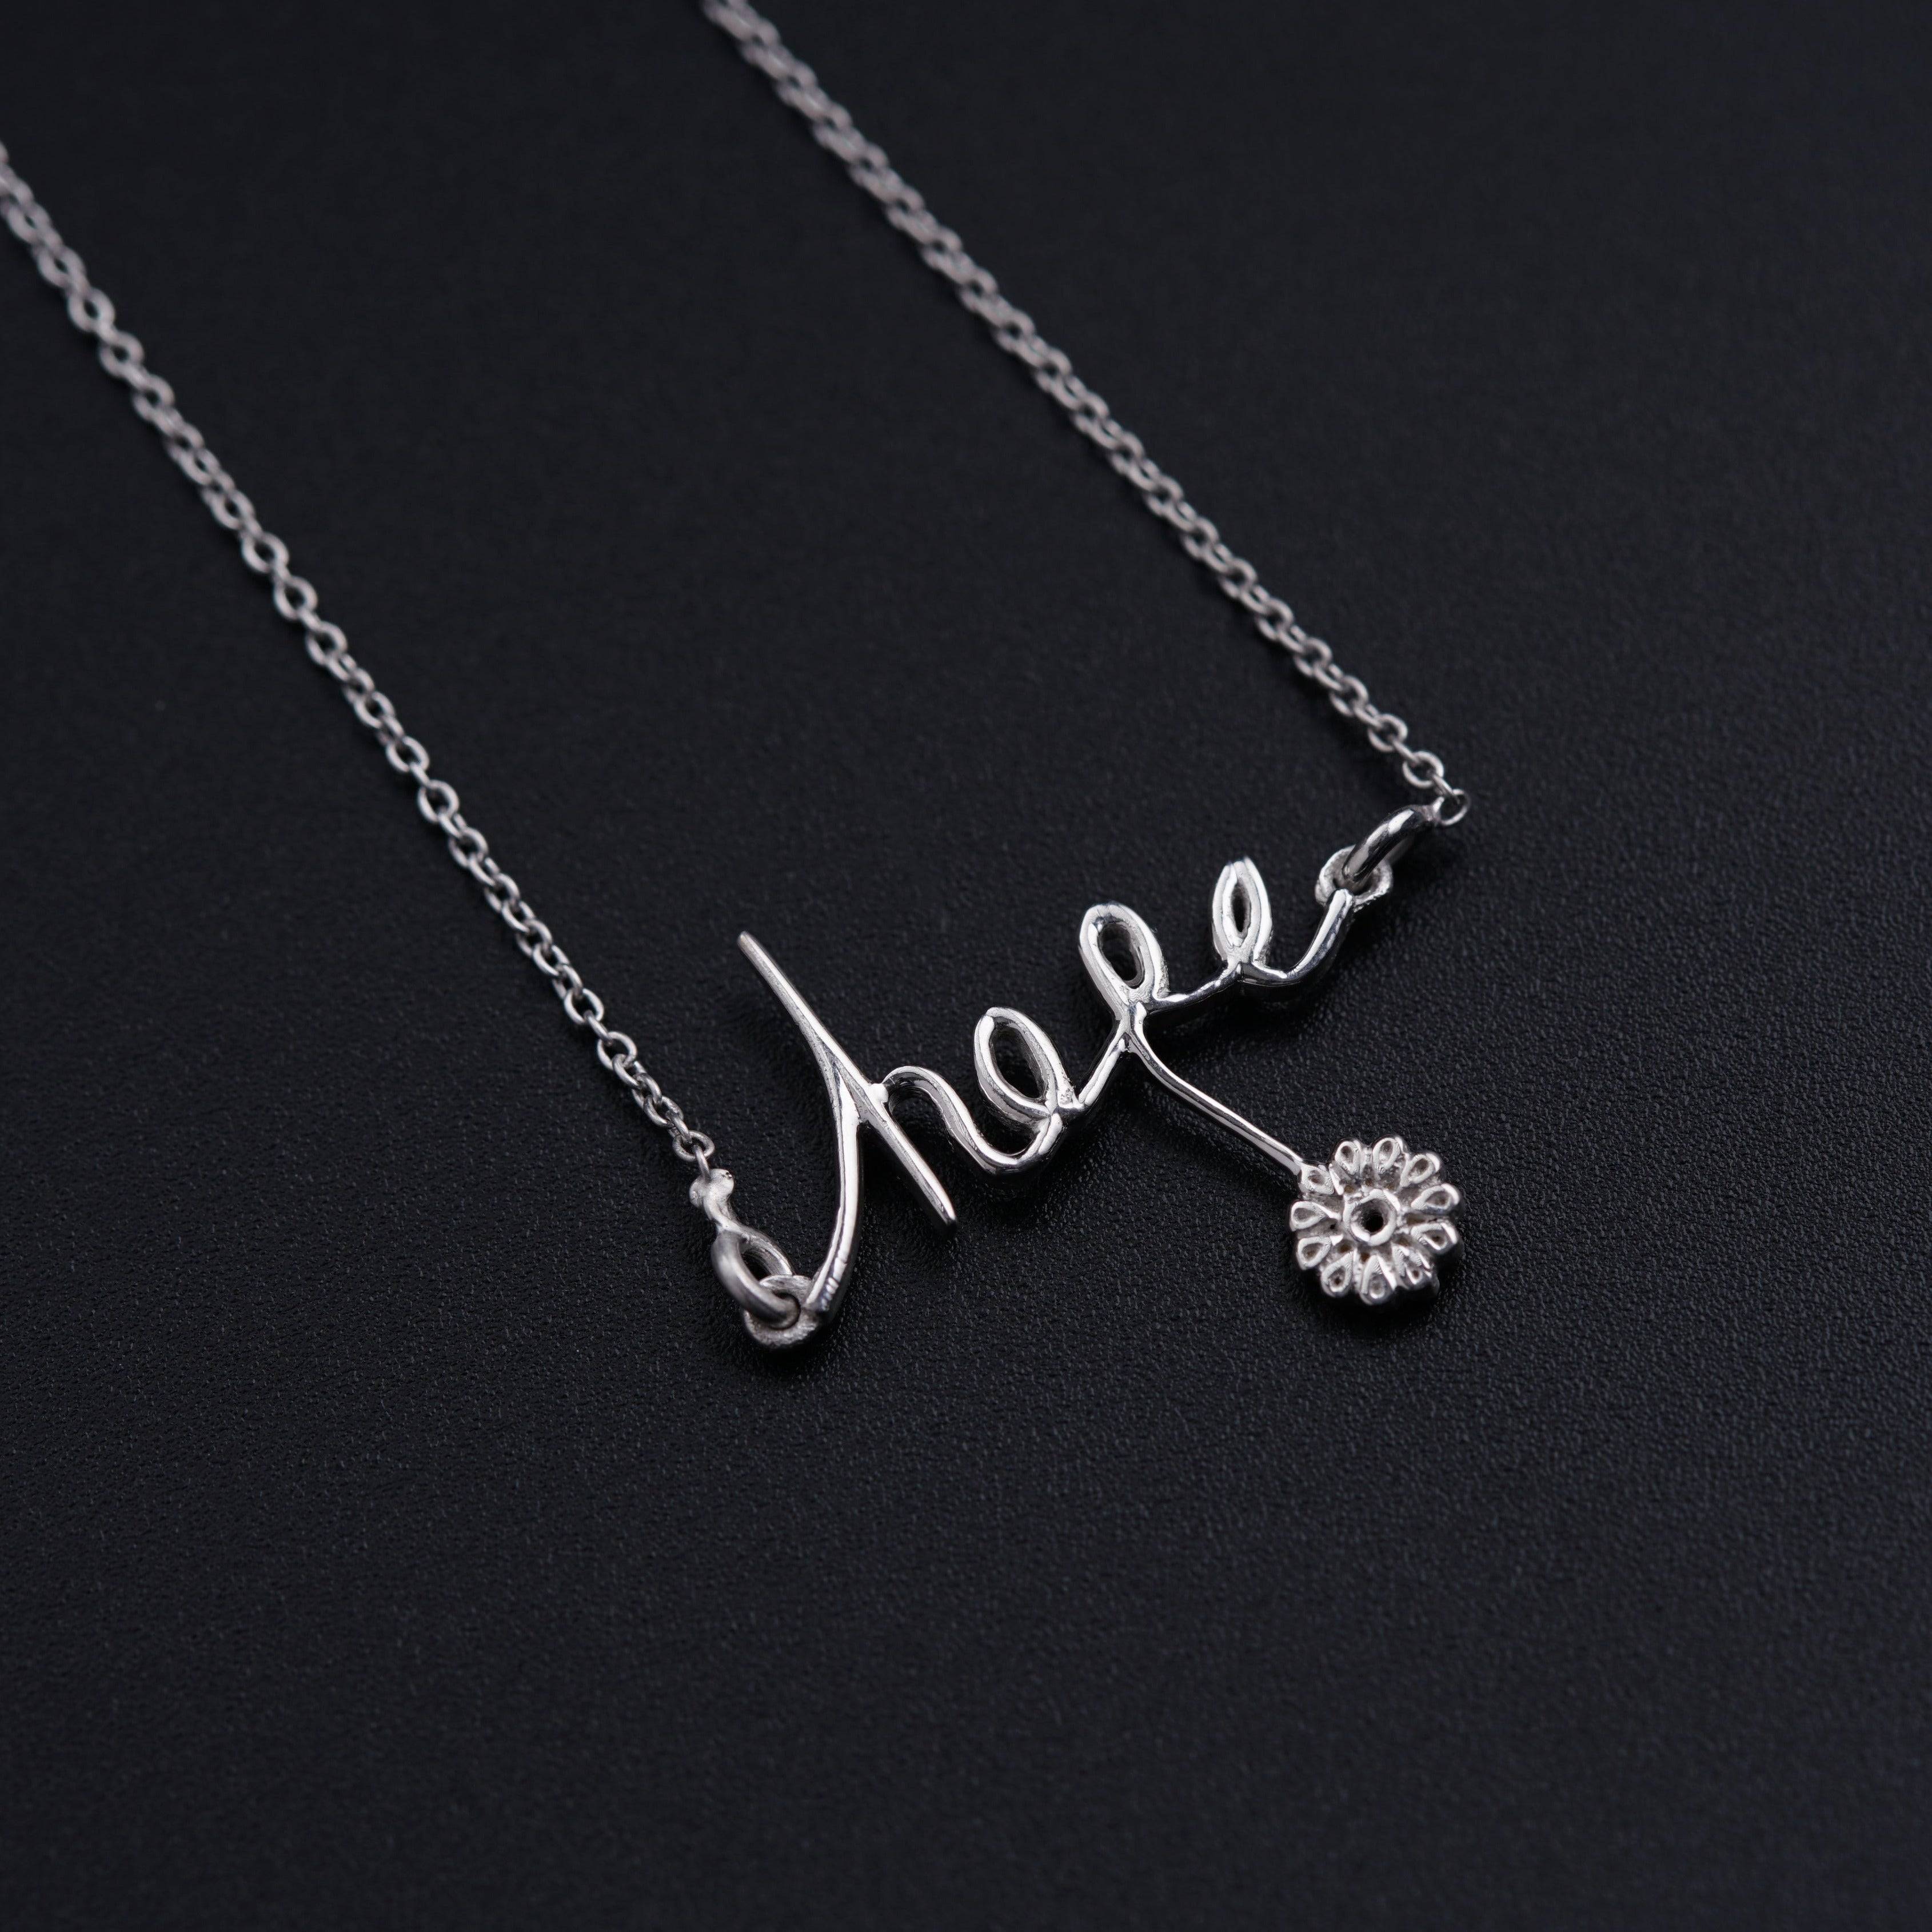 Silver Necklace with Hope Pendant